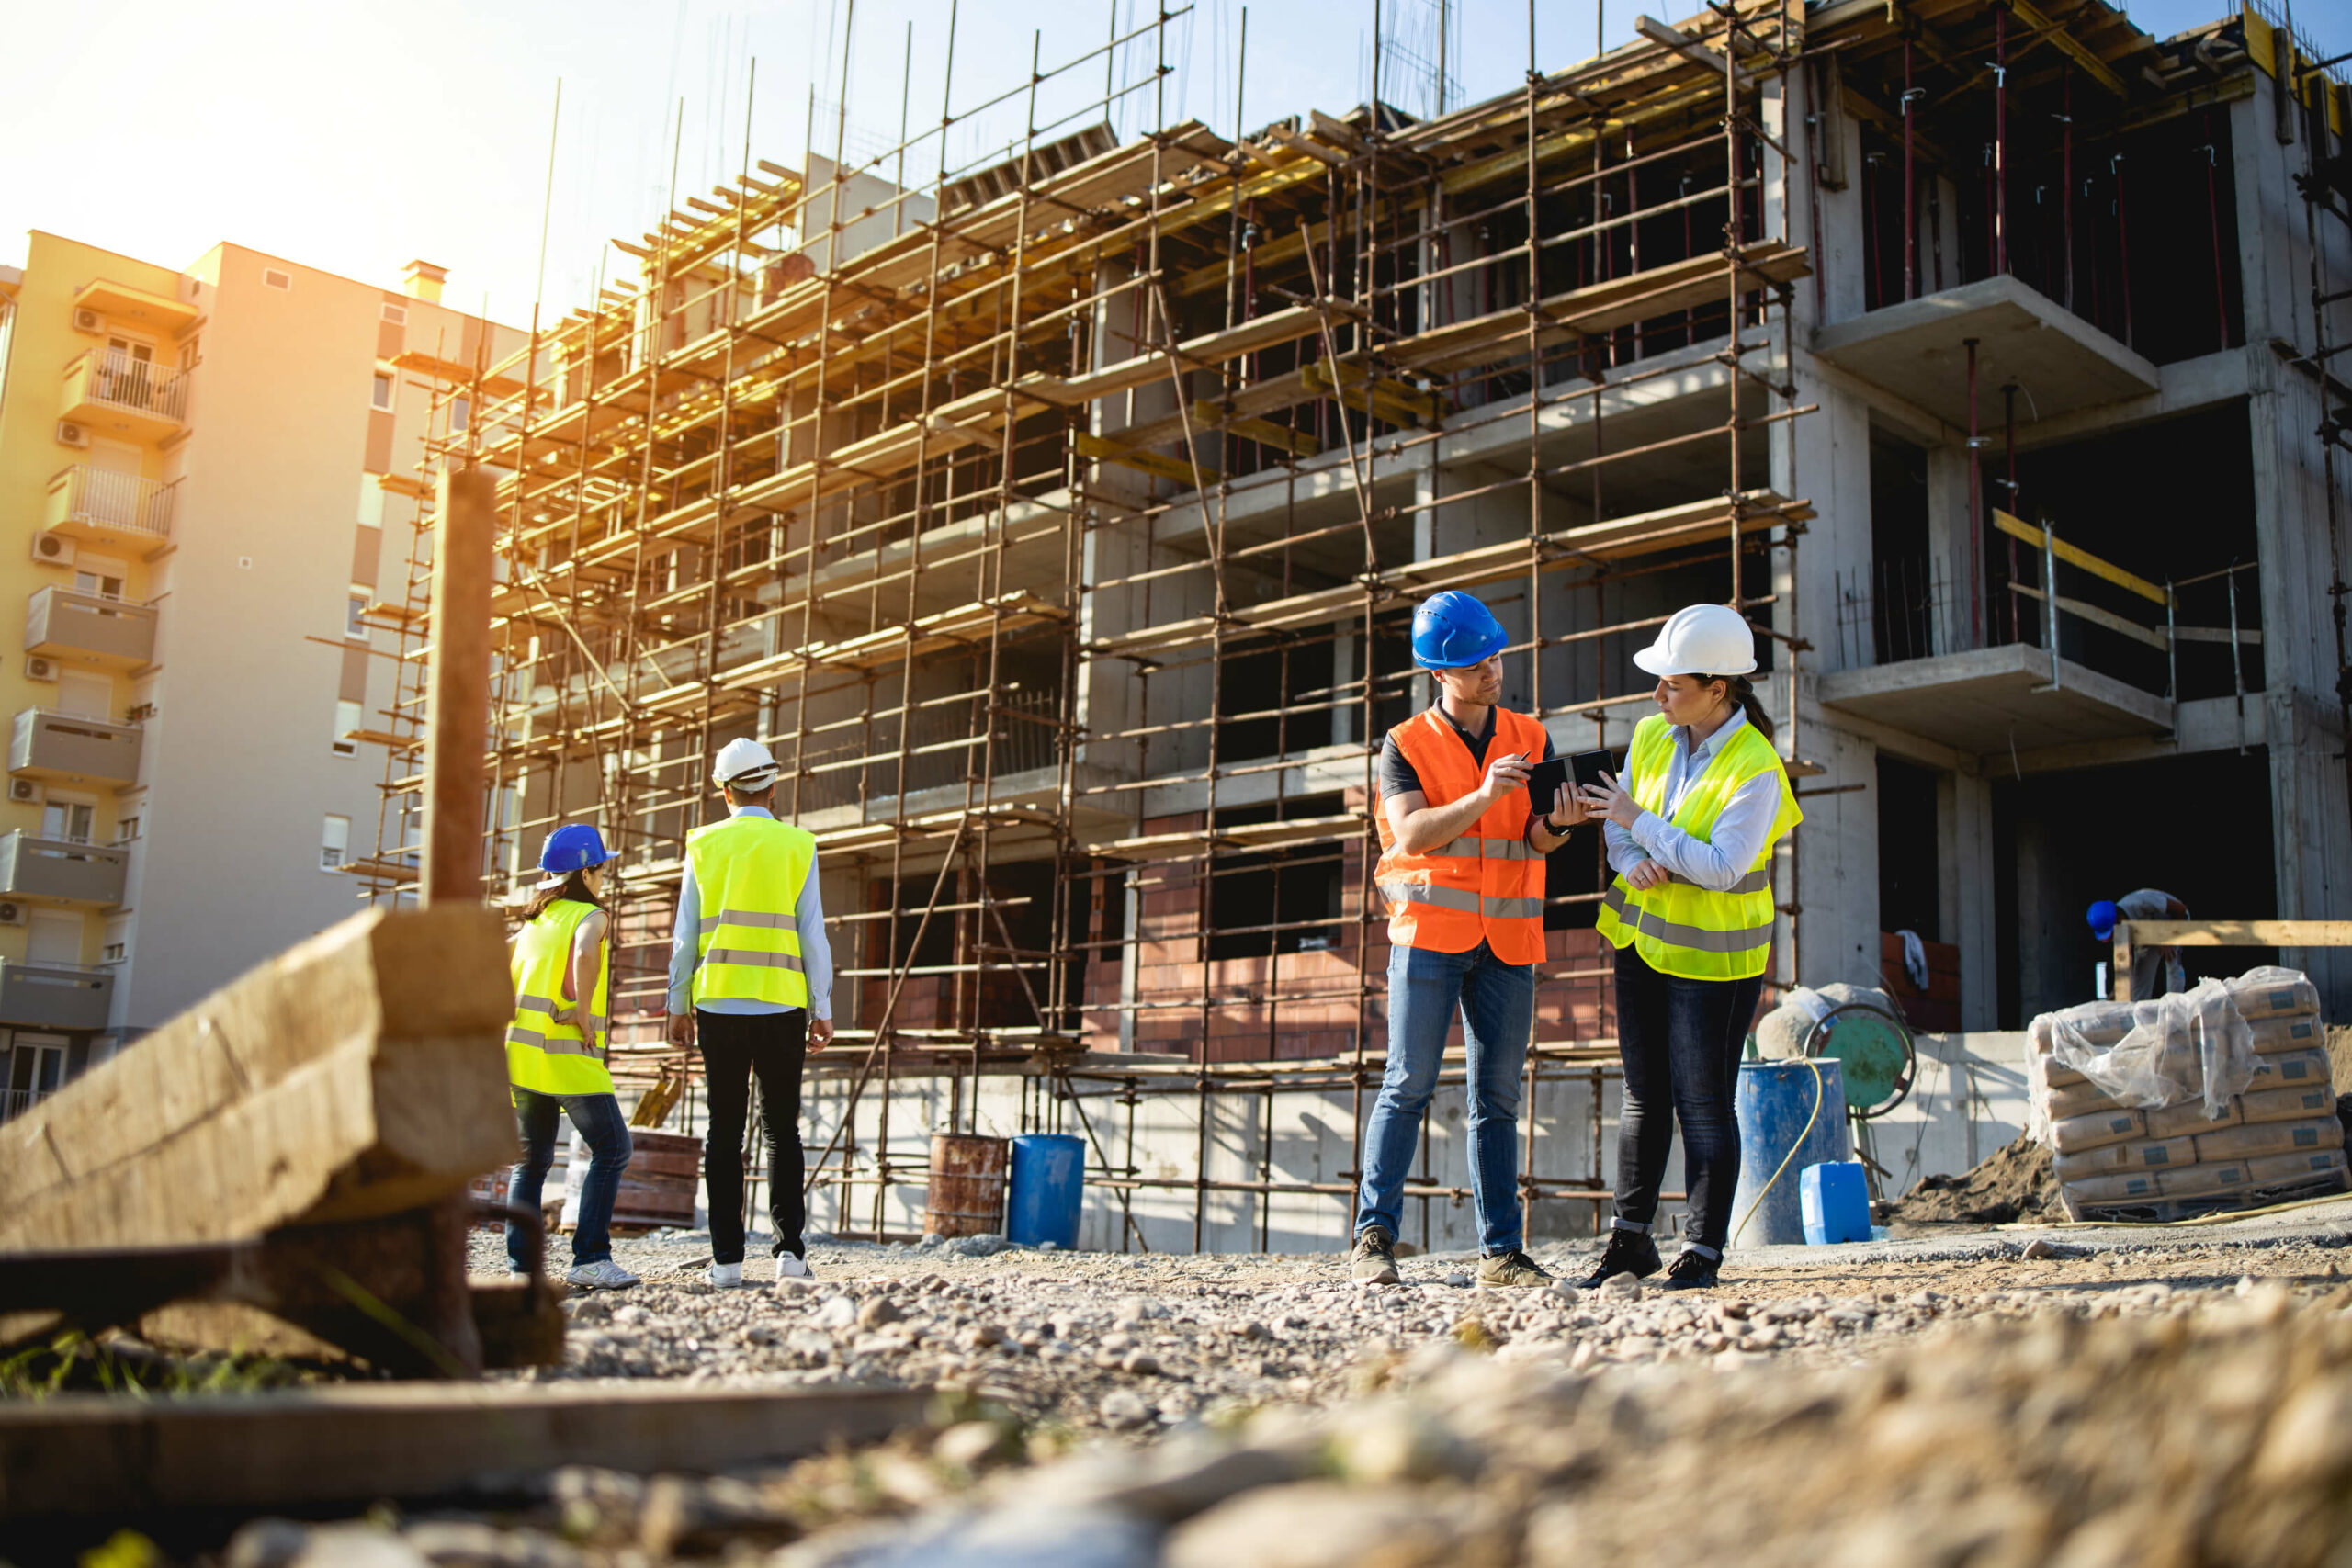 Security Tips for Businesses: How to Make Sure Construction Premises Are Safe